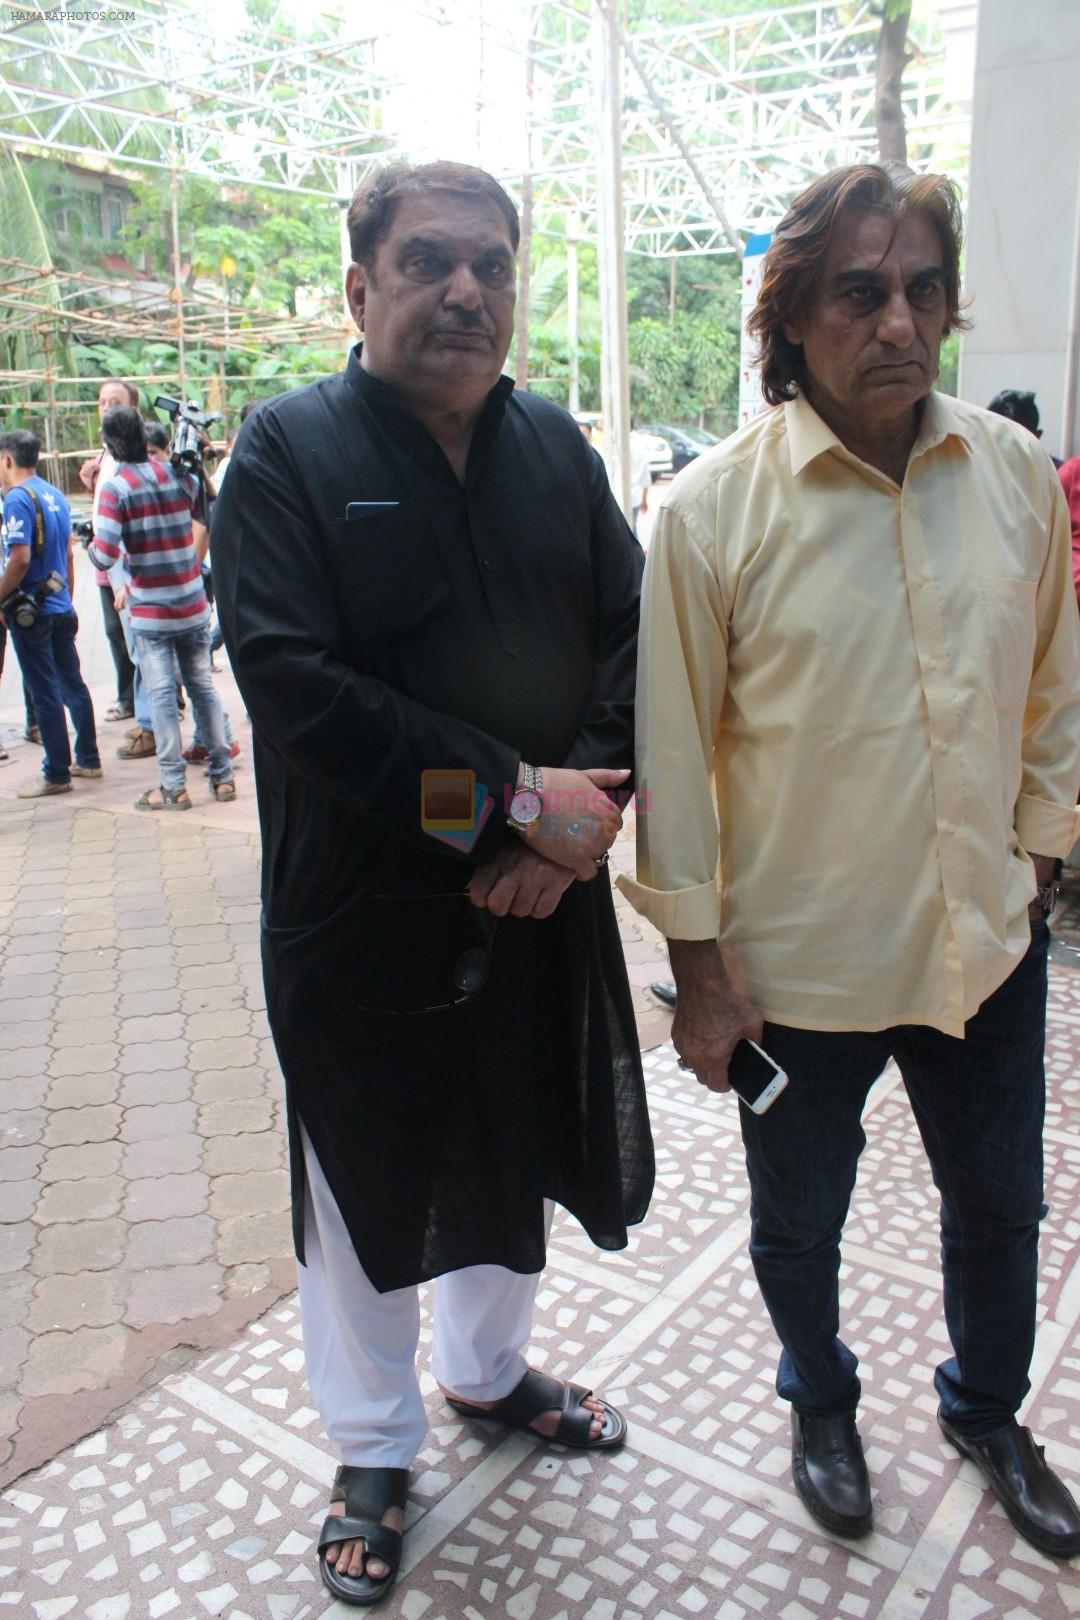 Raza Murad at The Chautha Ceremony Of Inder Kumar on 30th July 2017